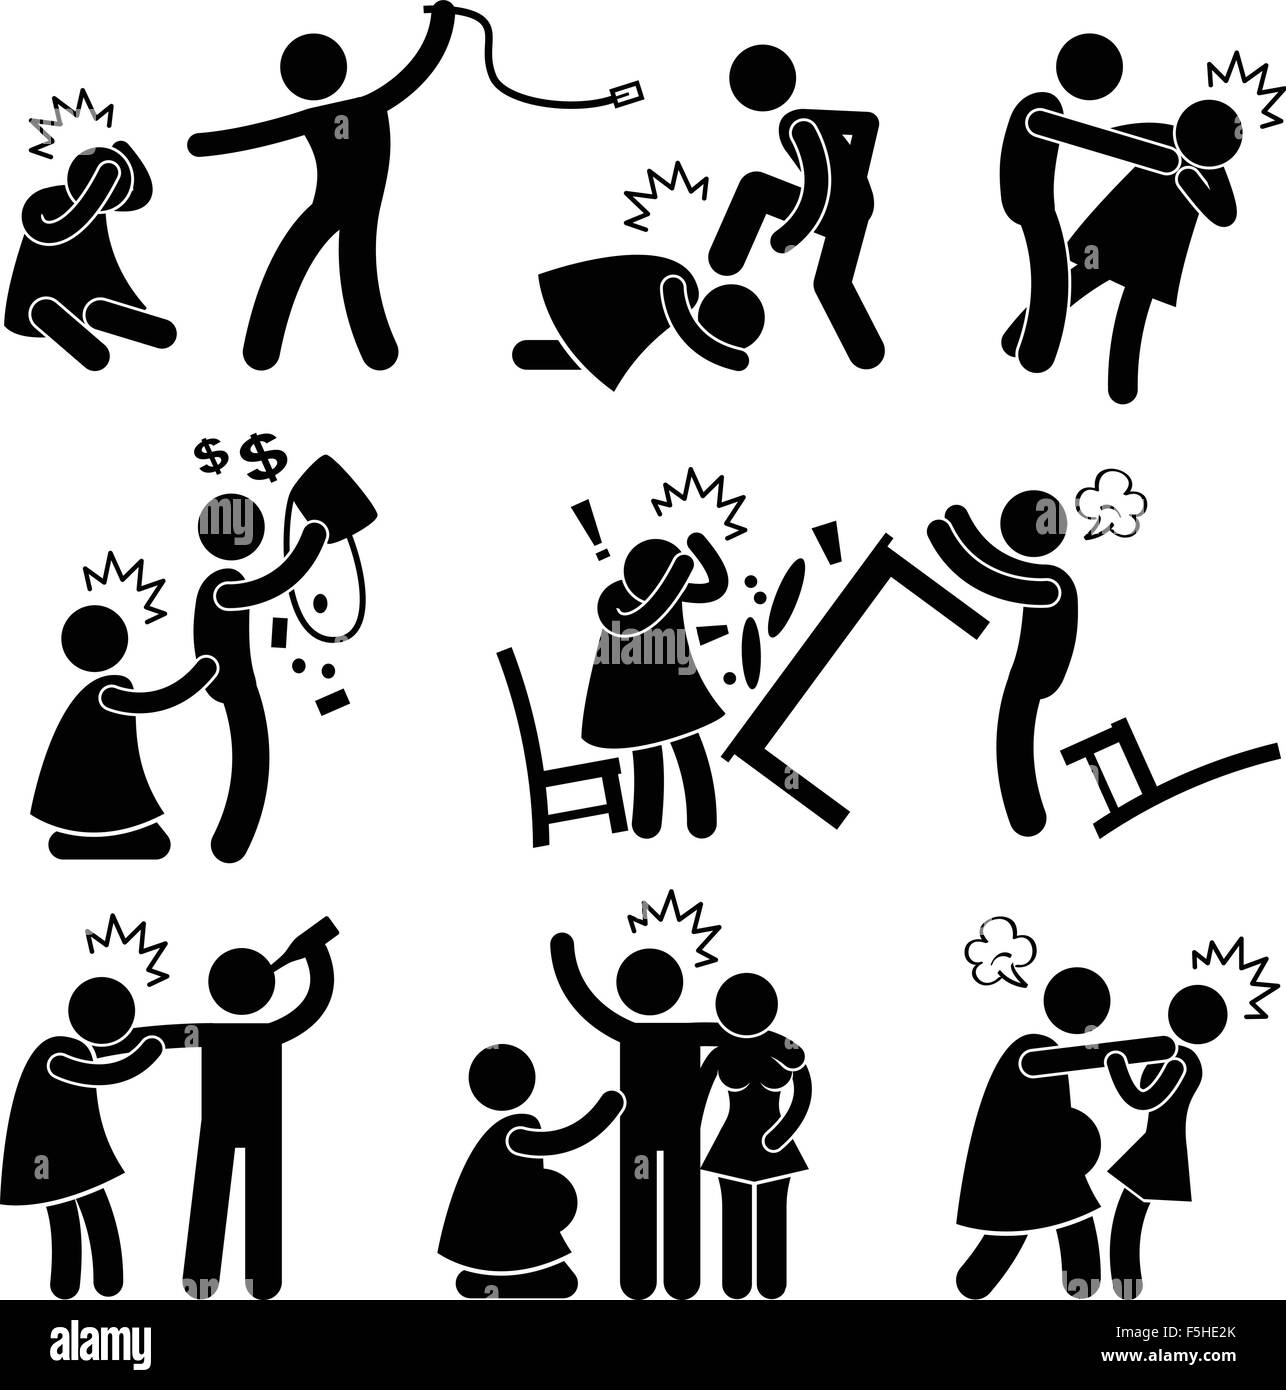 Abusive Husband Helpless Wife Stick Figure Pictogram Icon Stock Vector